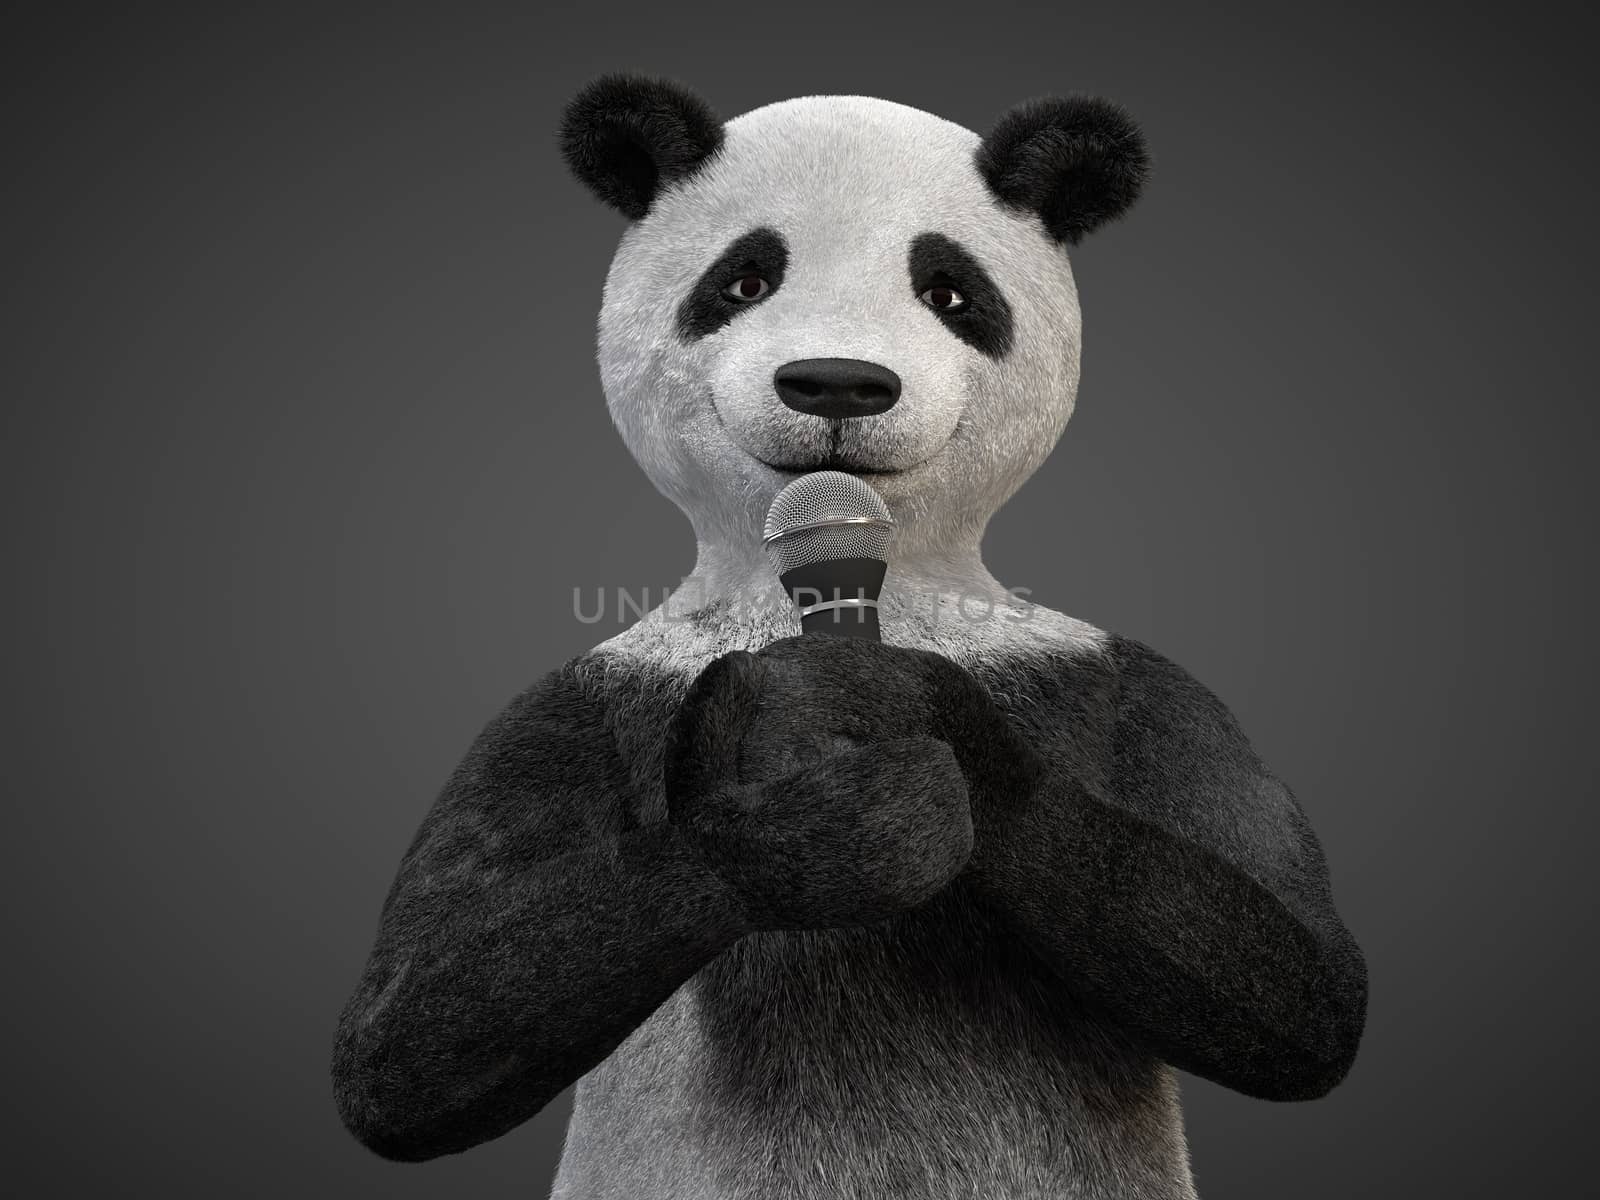 Personage character animal bear panda sing song microphone by xtate